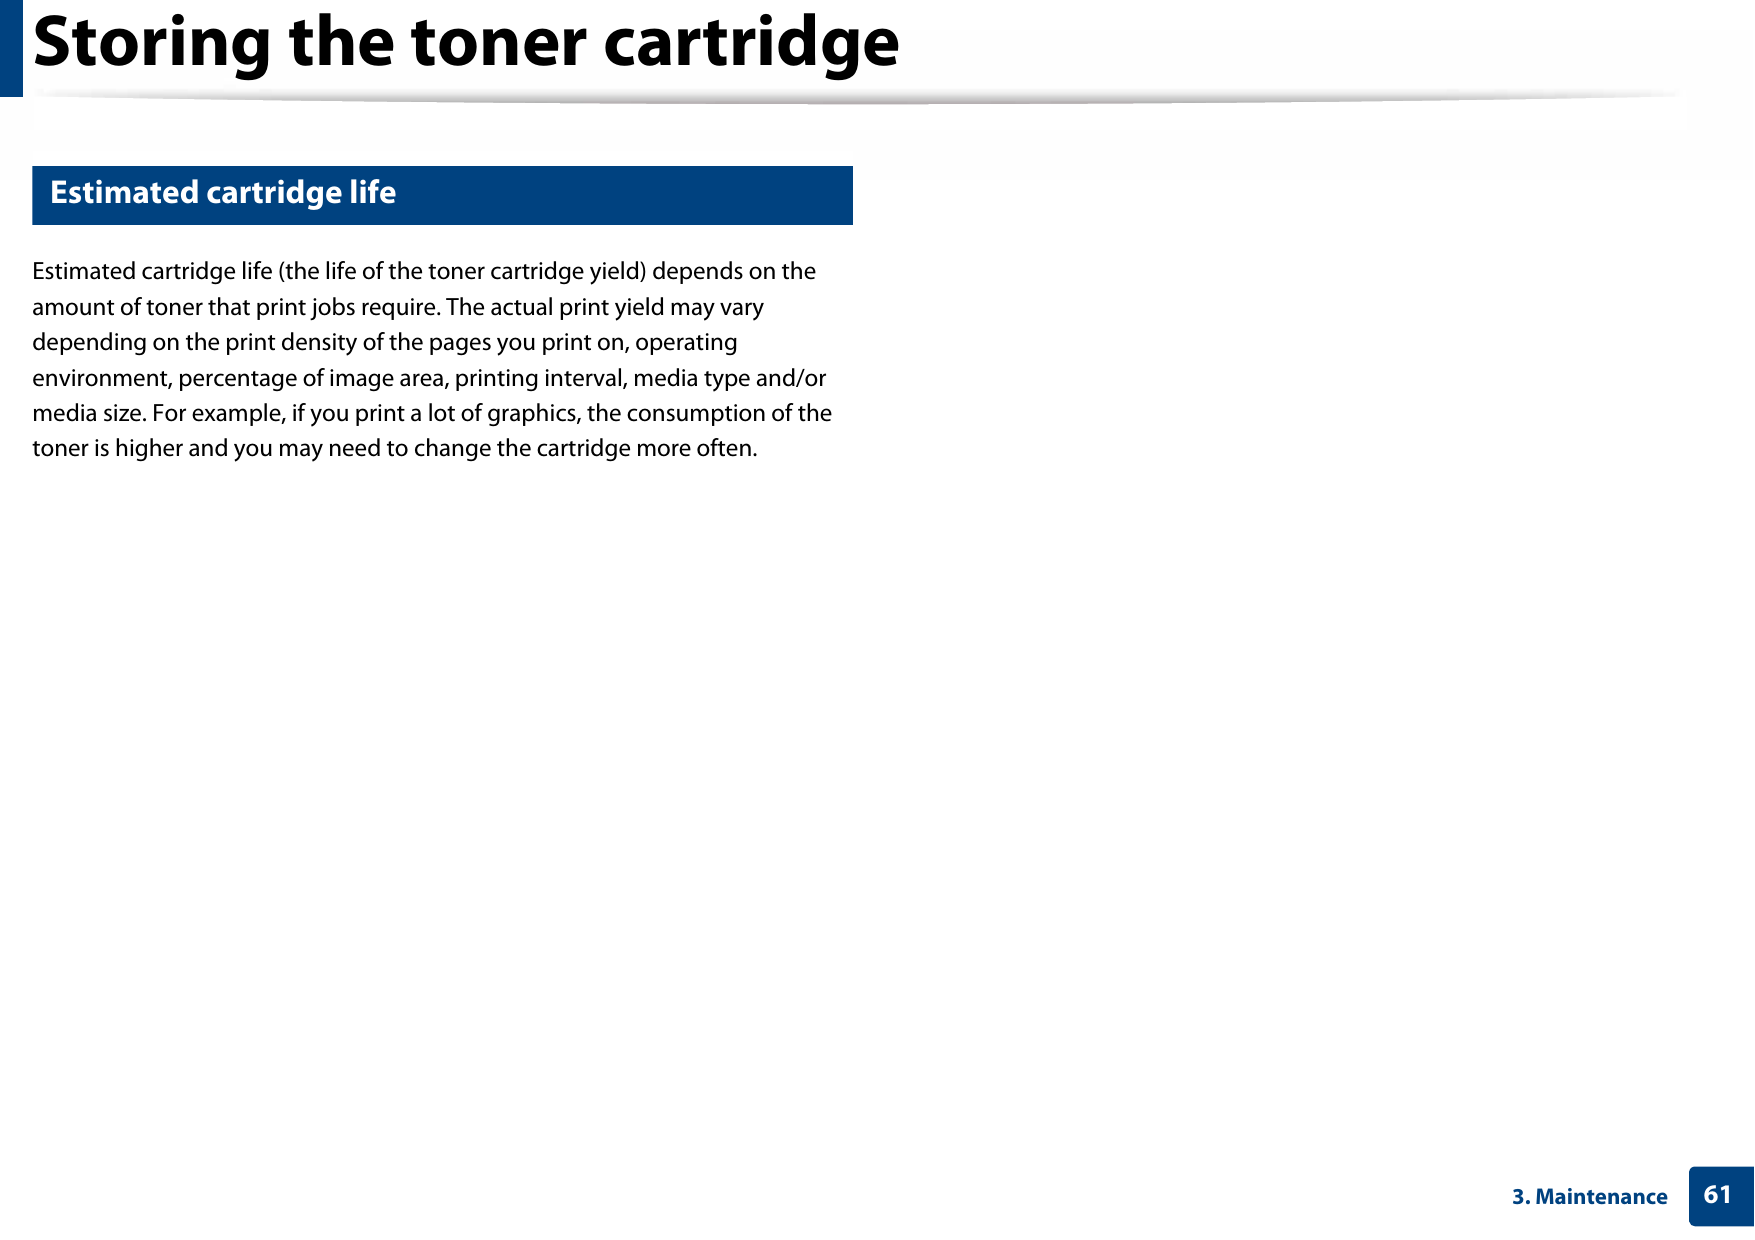 Storing the toner cartridge613. Maintenance3 Estimated cartridge lifeEstimated cartridge life (the life of the toner cartridge yield) depends on the amount of toner that print jobs require. The actual print yield may vary depending on the print density of the pages you print on, operating environment, percentage of image area, printing interval, media type and/or media size. For example, if you print a lot of graphics, the consumption of the toner is higher and you may need to change the cartridge more often.